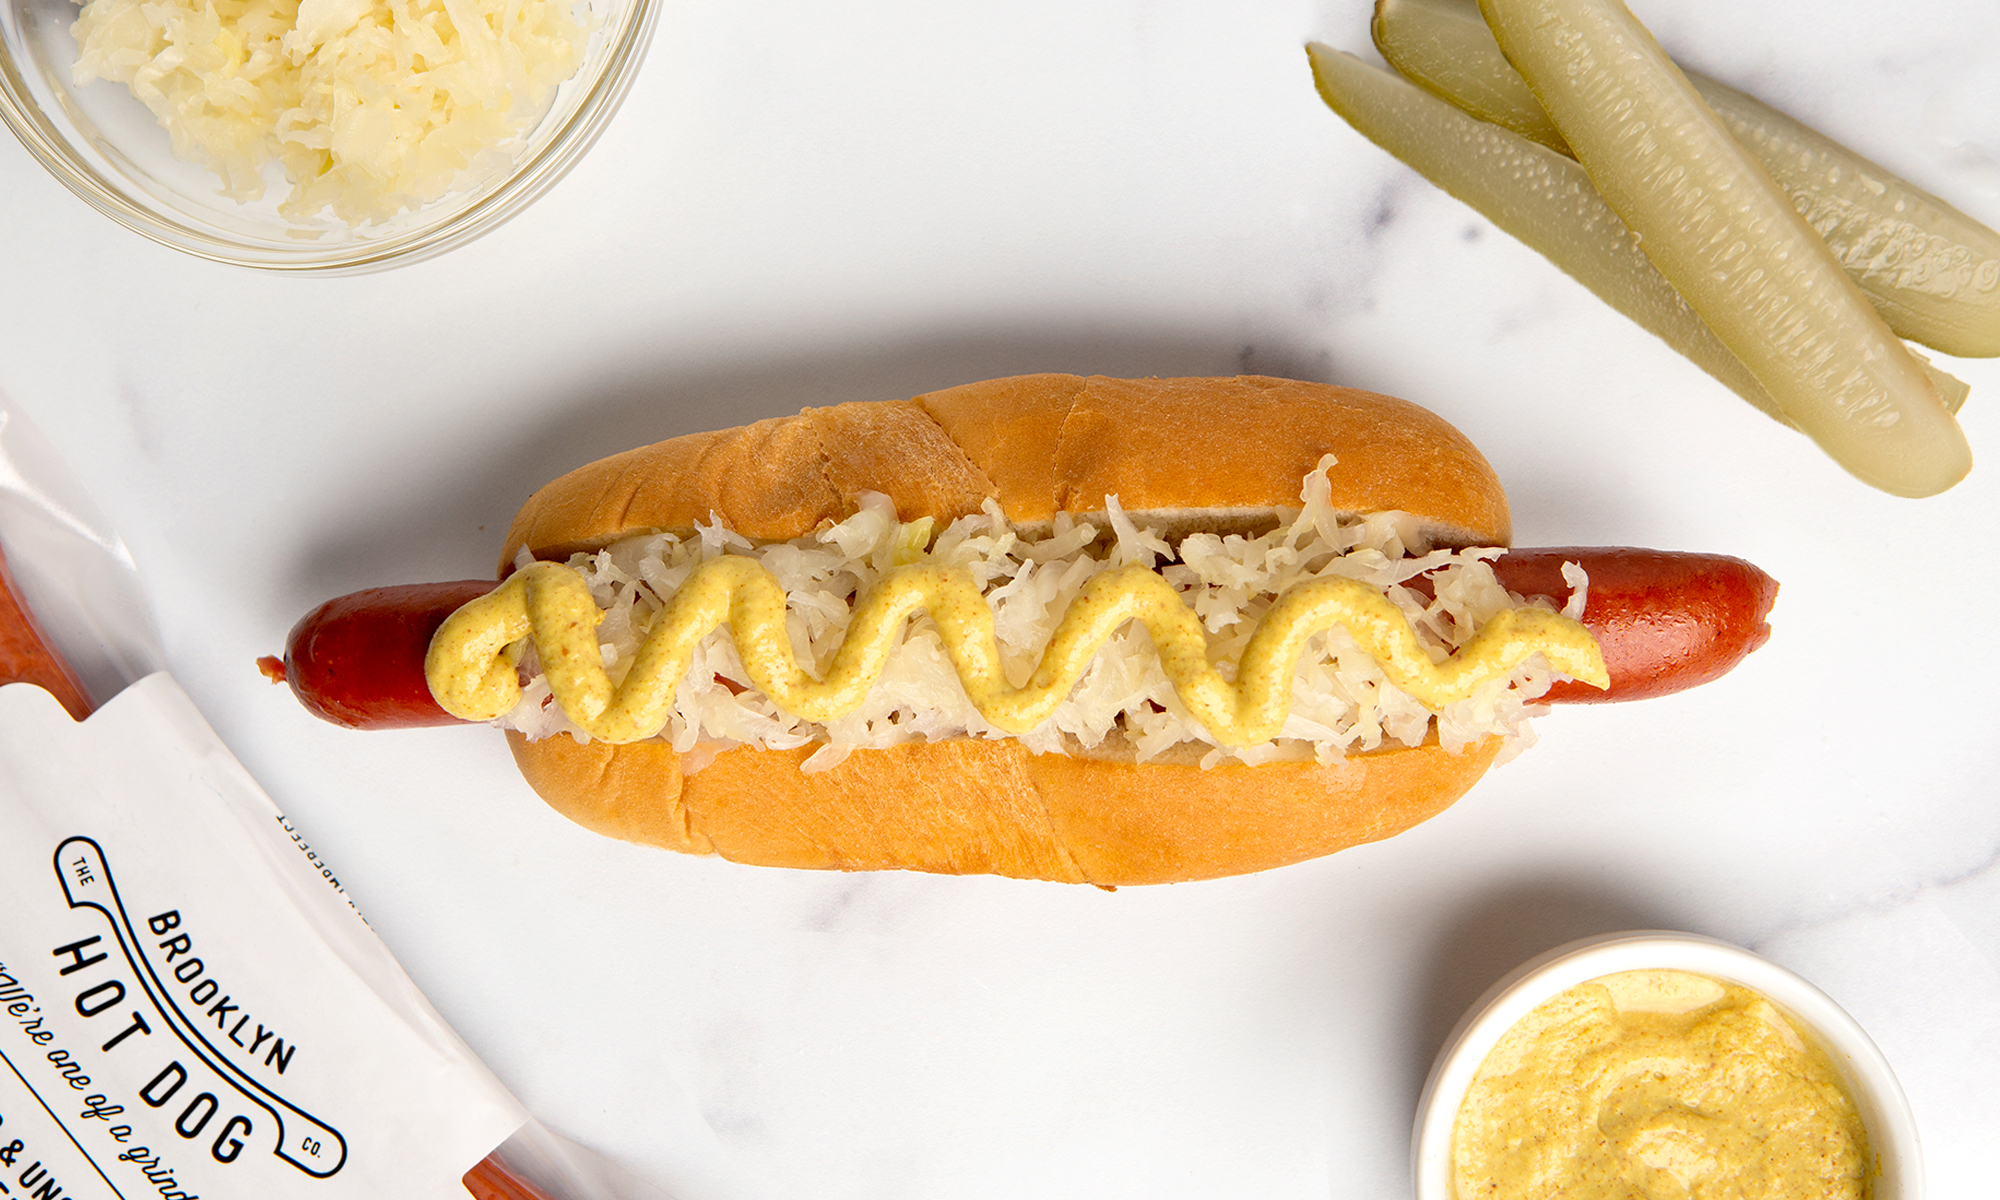 Upgrade Your Grilling Game With The Brooklyn Hot Dog Co.